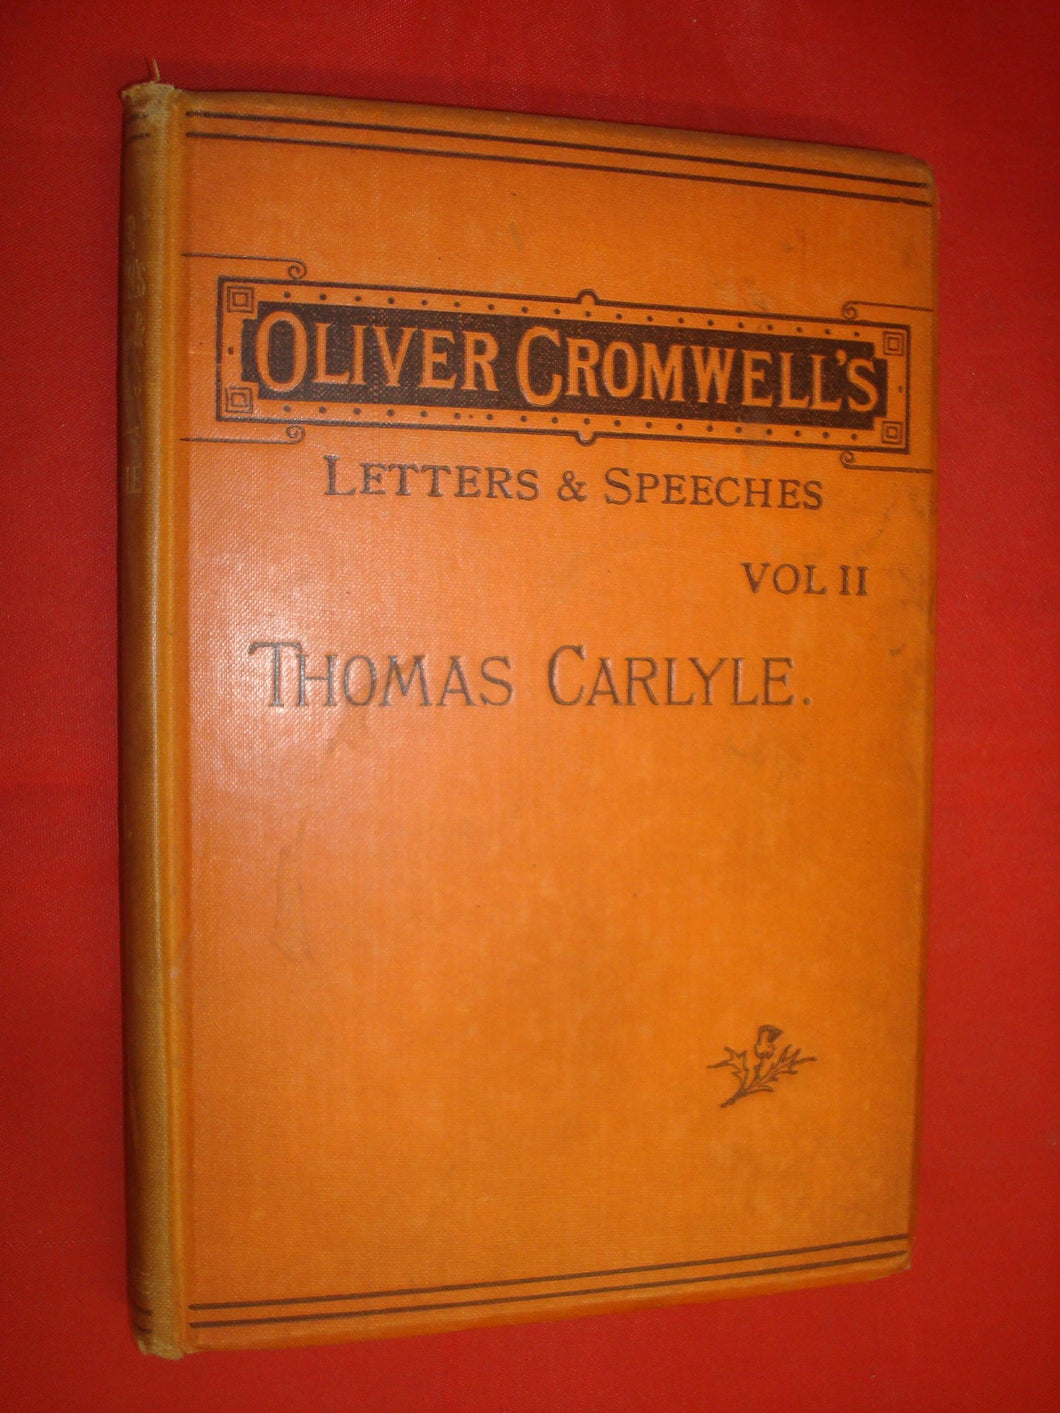 Oliver Cromwell's Letters and Speeches: Vol.II by Thomas Carlyle [Hardcover] Thomas Carlyle